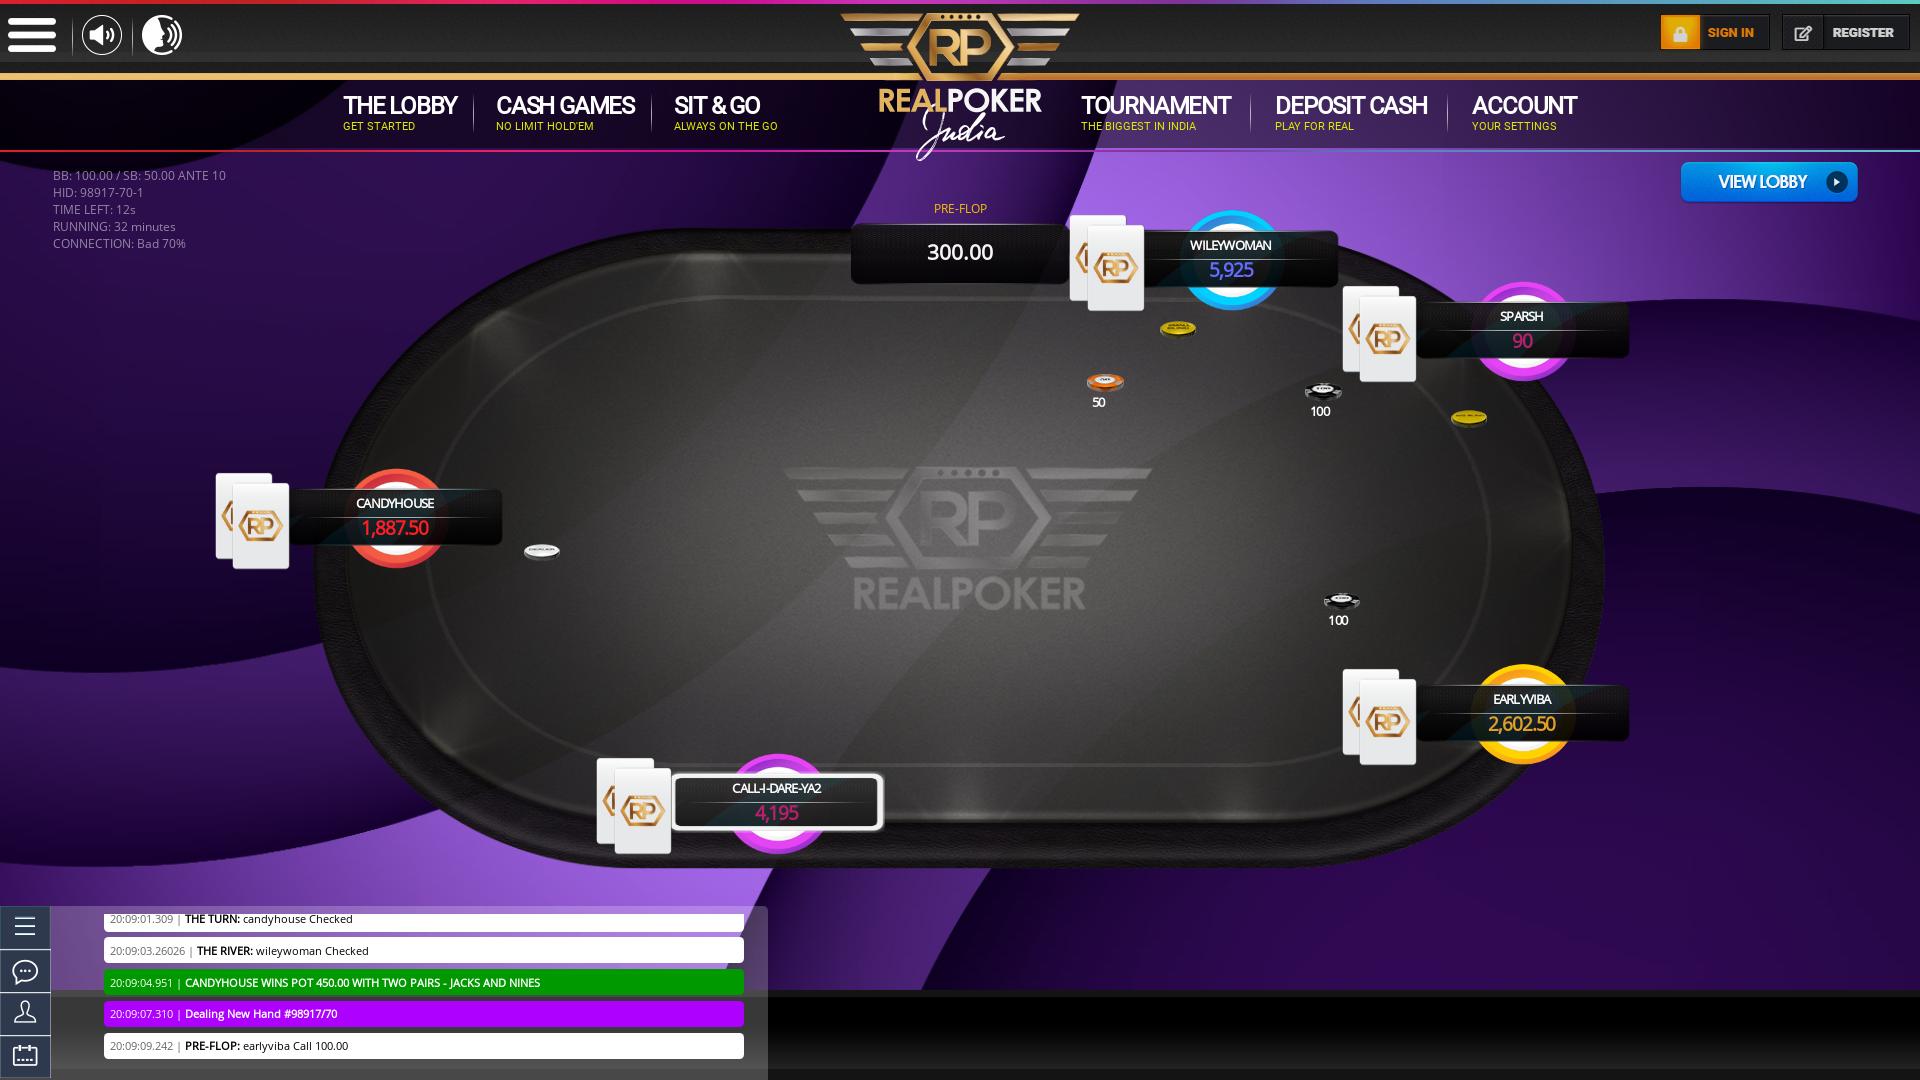 Chandigarh poker table on a 10 player table in the 32nd minute